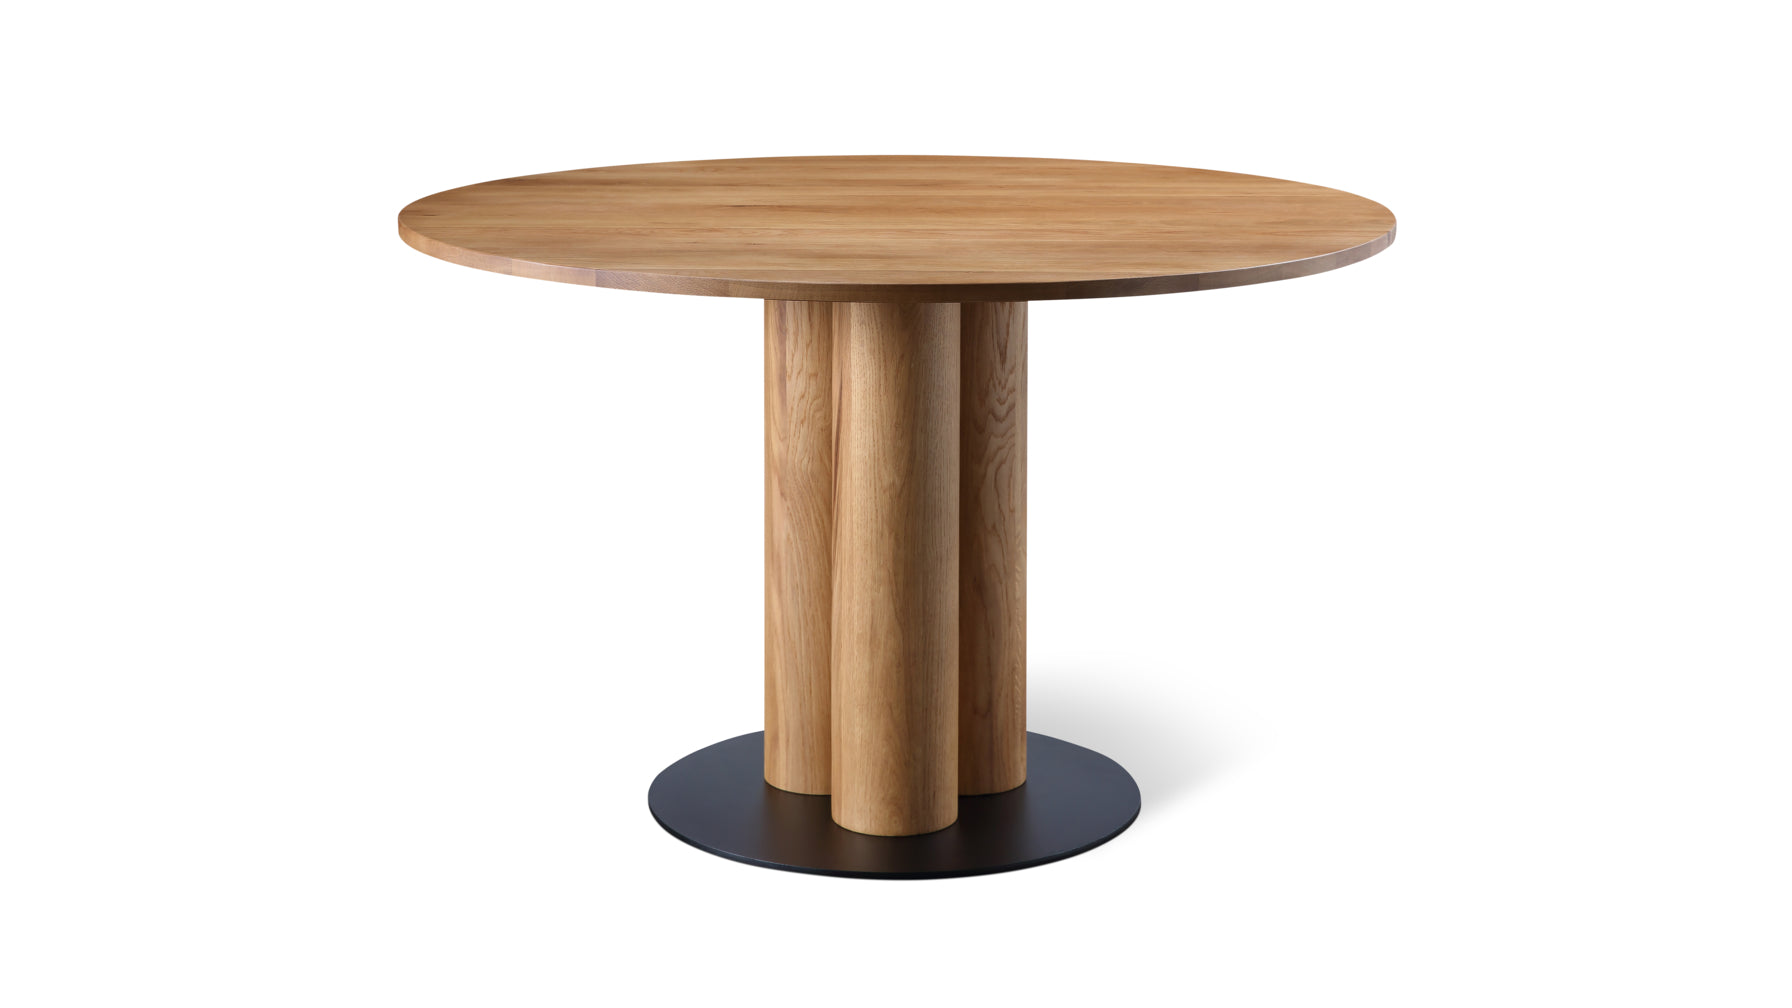 Formation Dining Table, Seats 4-5 People, White Oak - Image 1